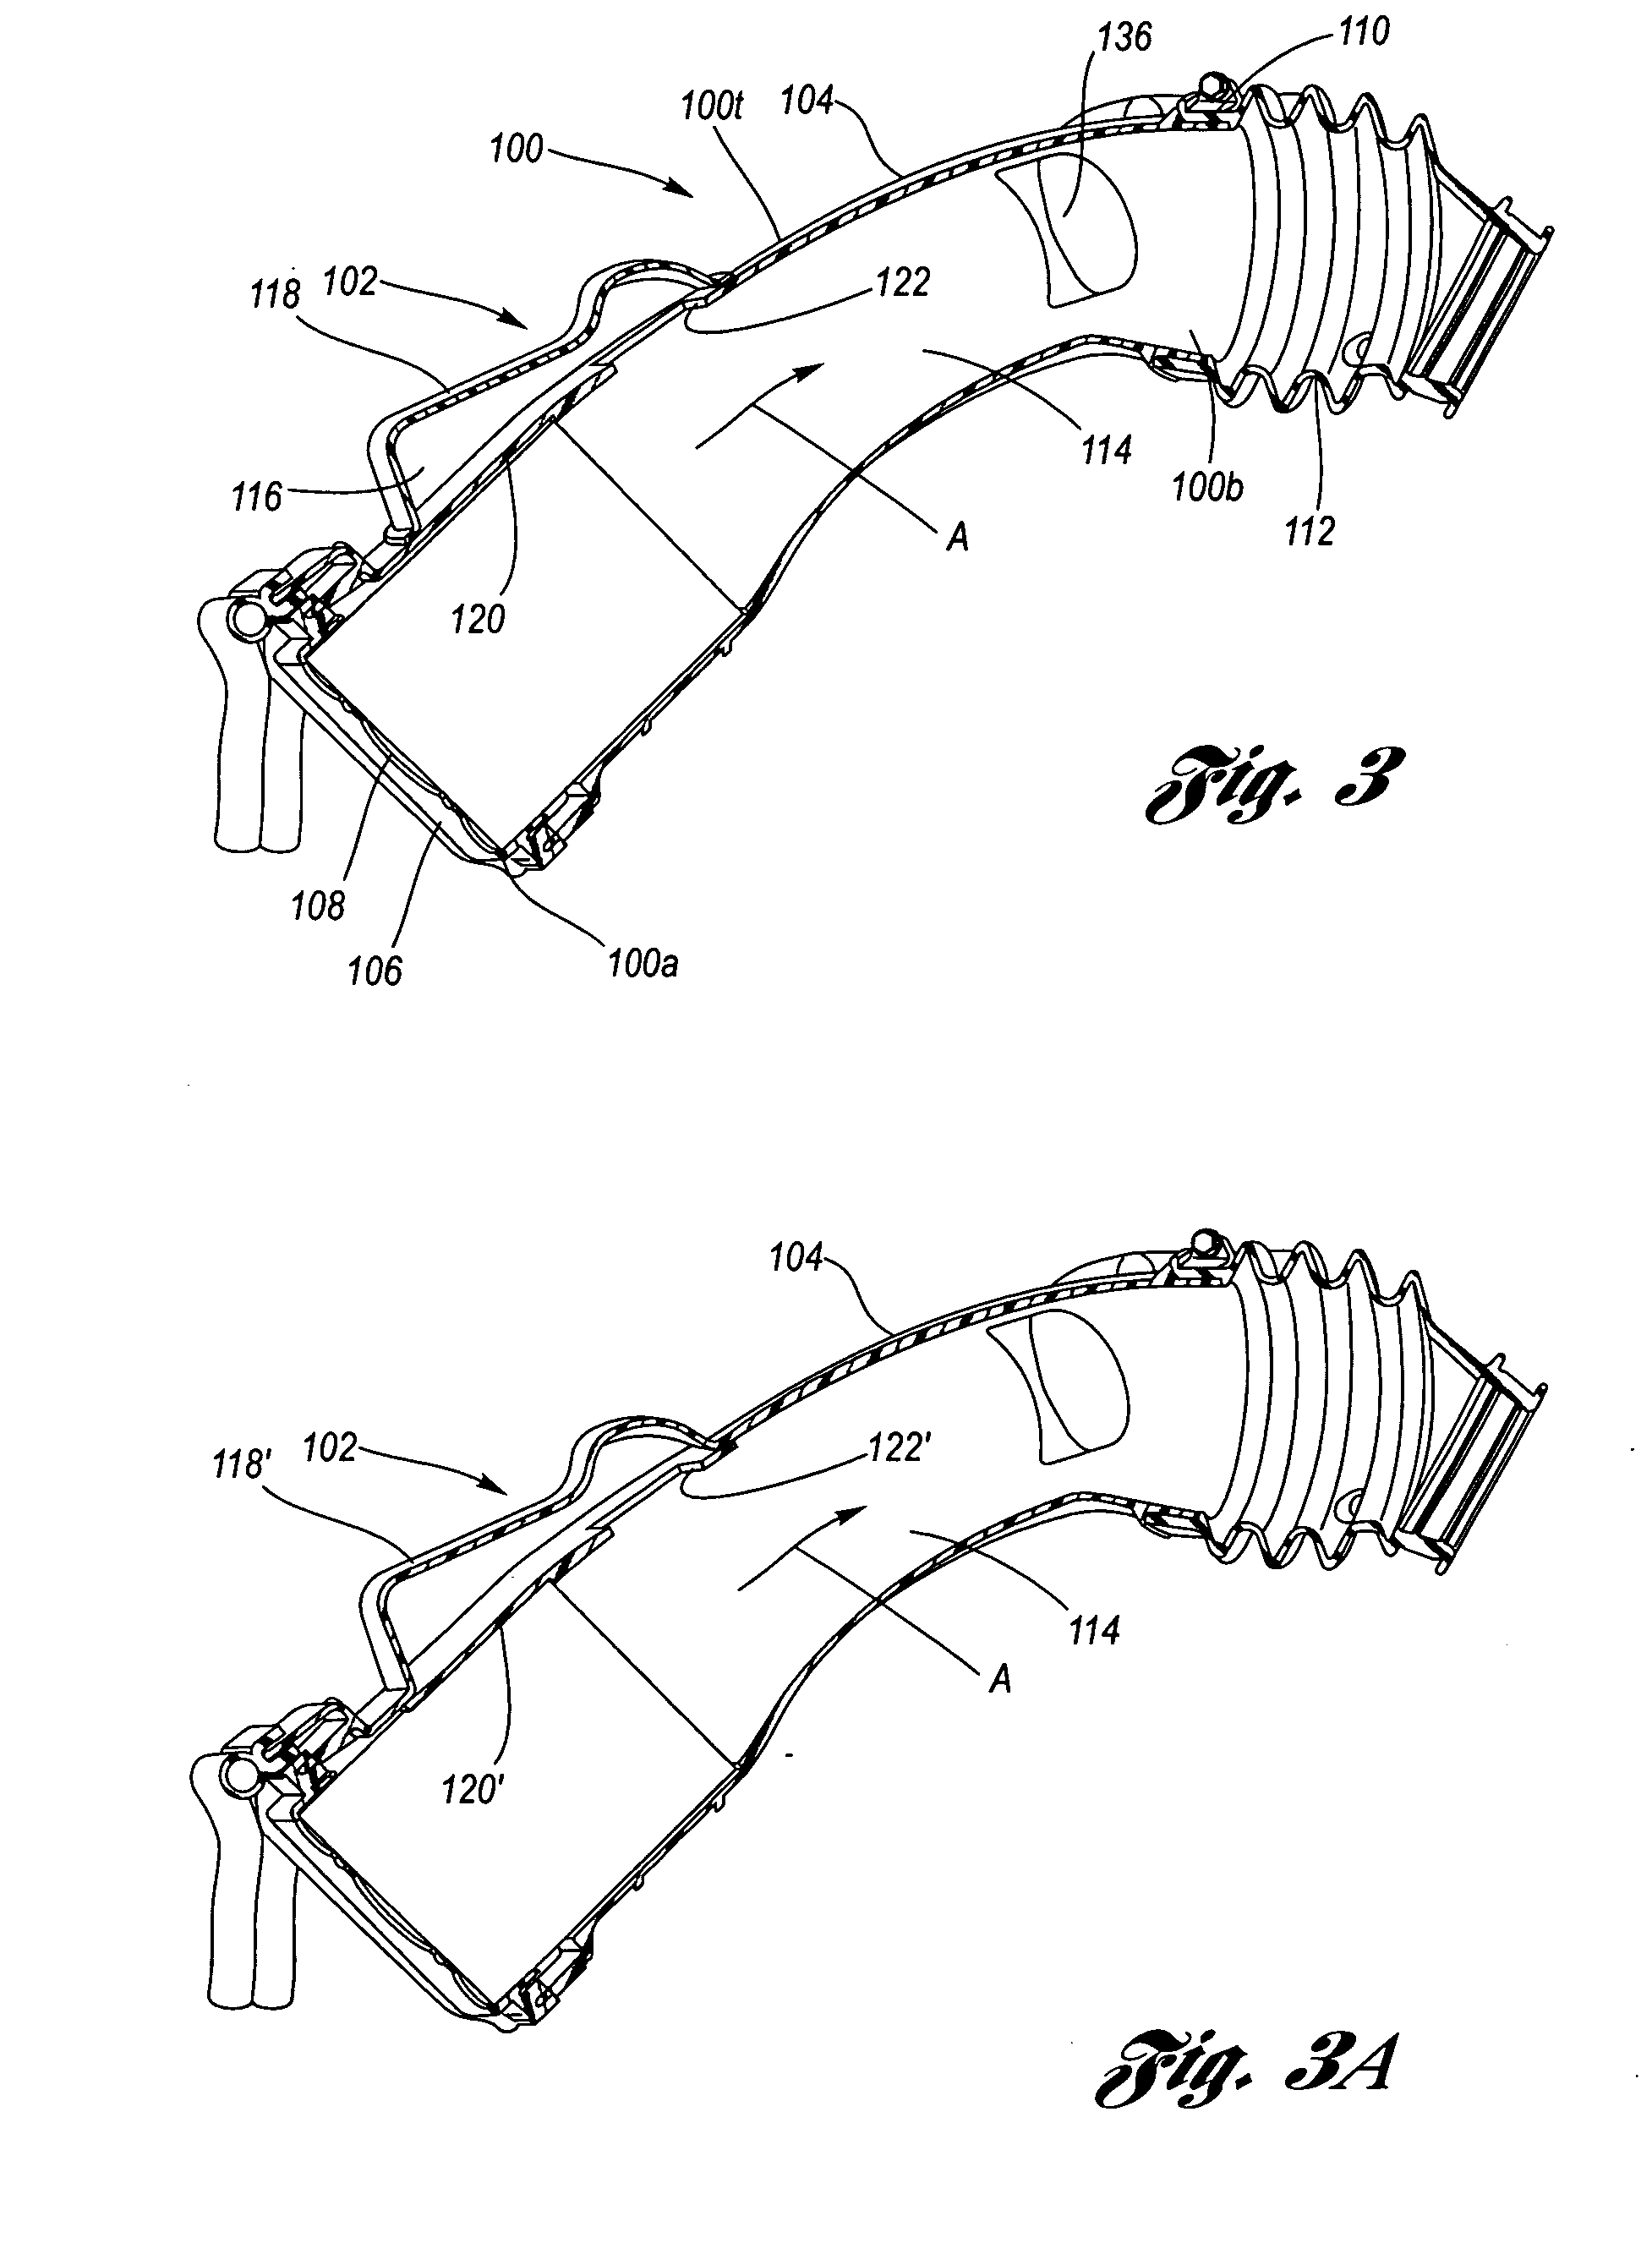 Air induction housing having an auxiliary tuning volume for enhancing attenuation and broadening the bandwidth of a primary sound attenuator